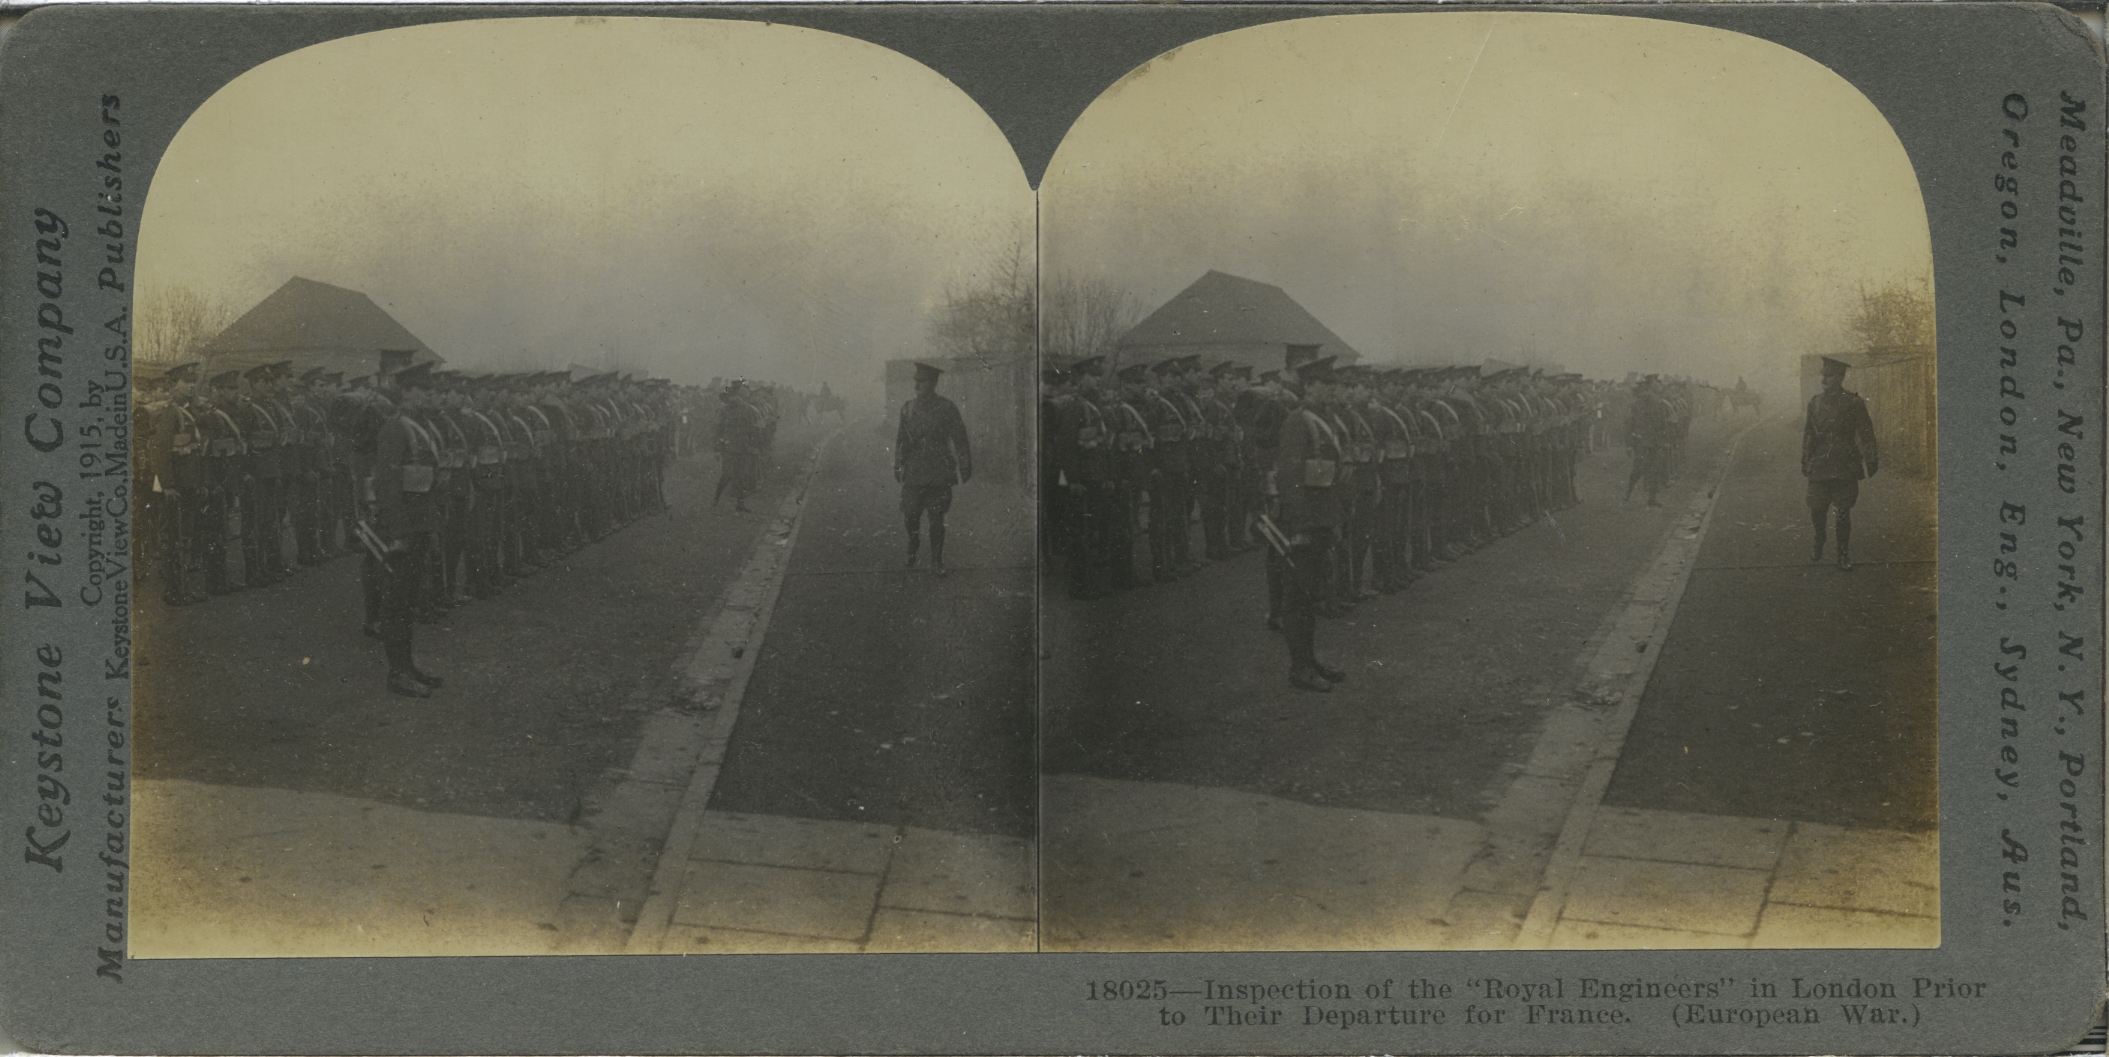 Inspection of the "Royal Engineers" in London Prior to Their Departure for France. (European War)